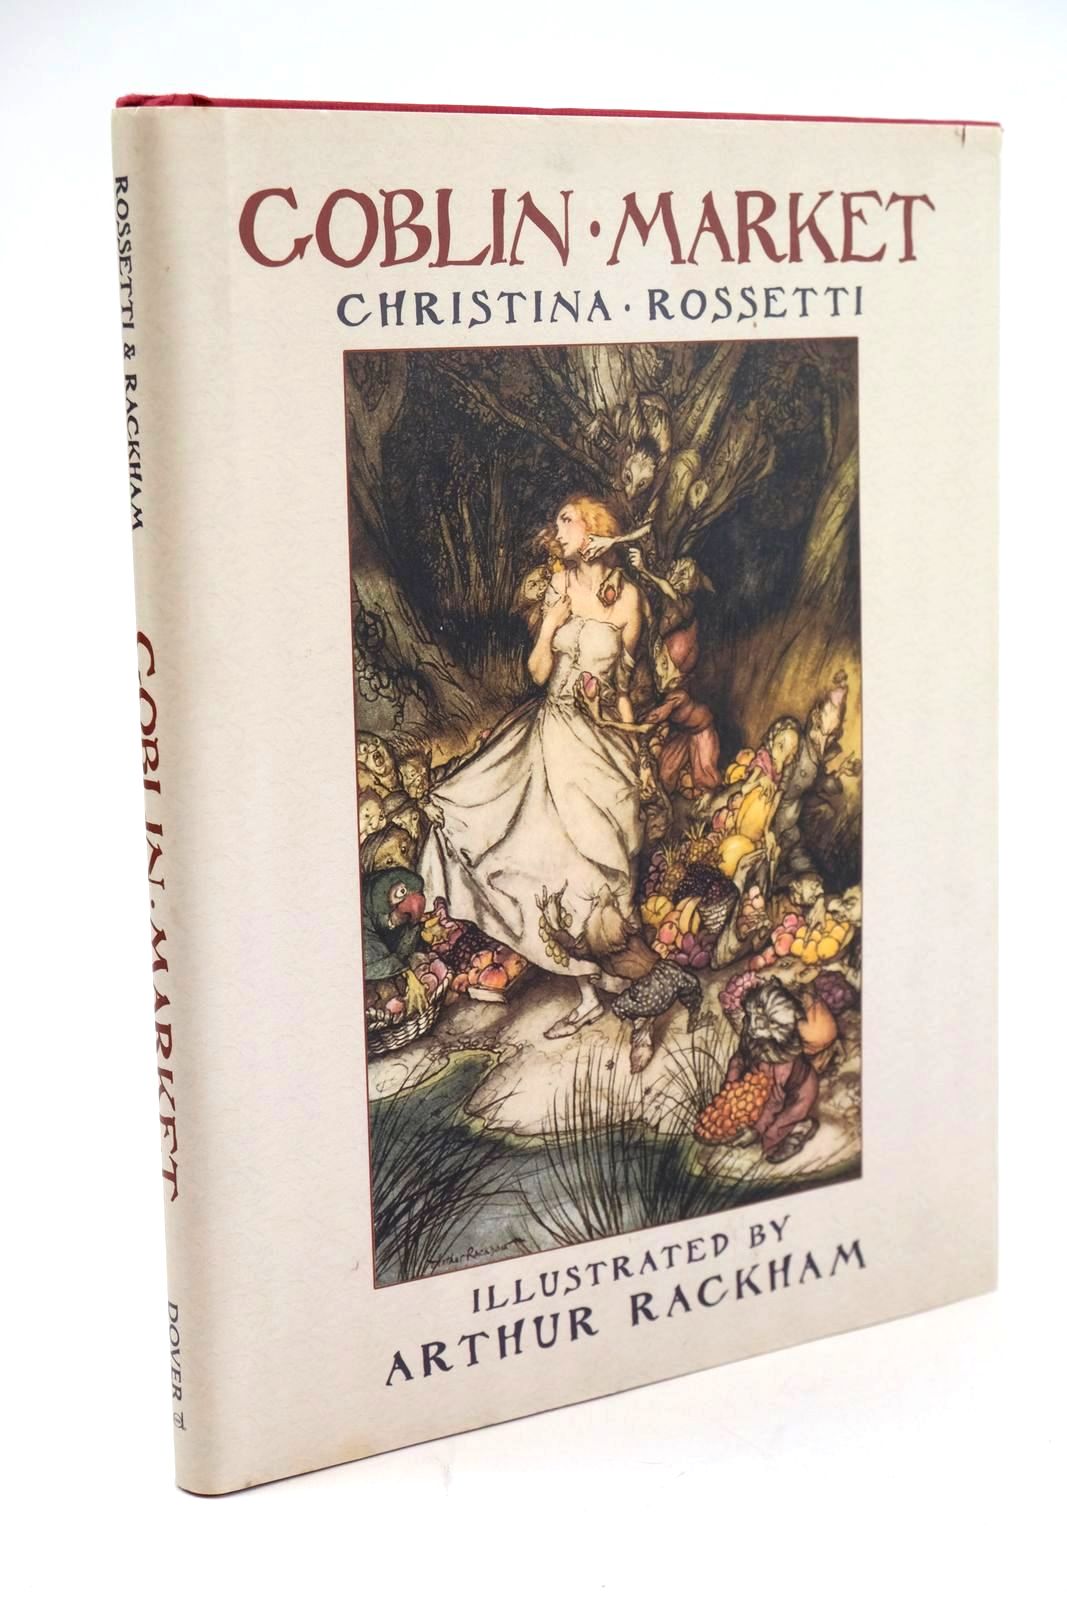 Photo of GOBLIN MARKET written by Rossetti, Christina illustrated by Rackham, Arthur published by Dover Publications (STOCK CODE: 1325048)  for sale by Stella & Rose's Books